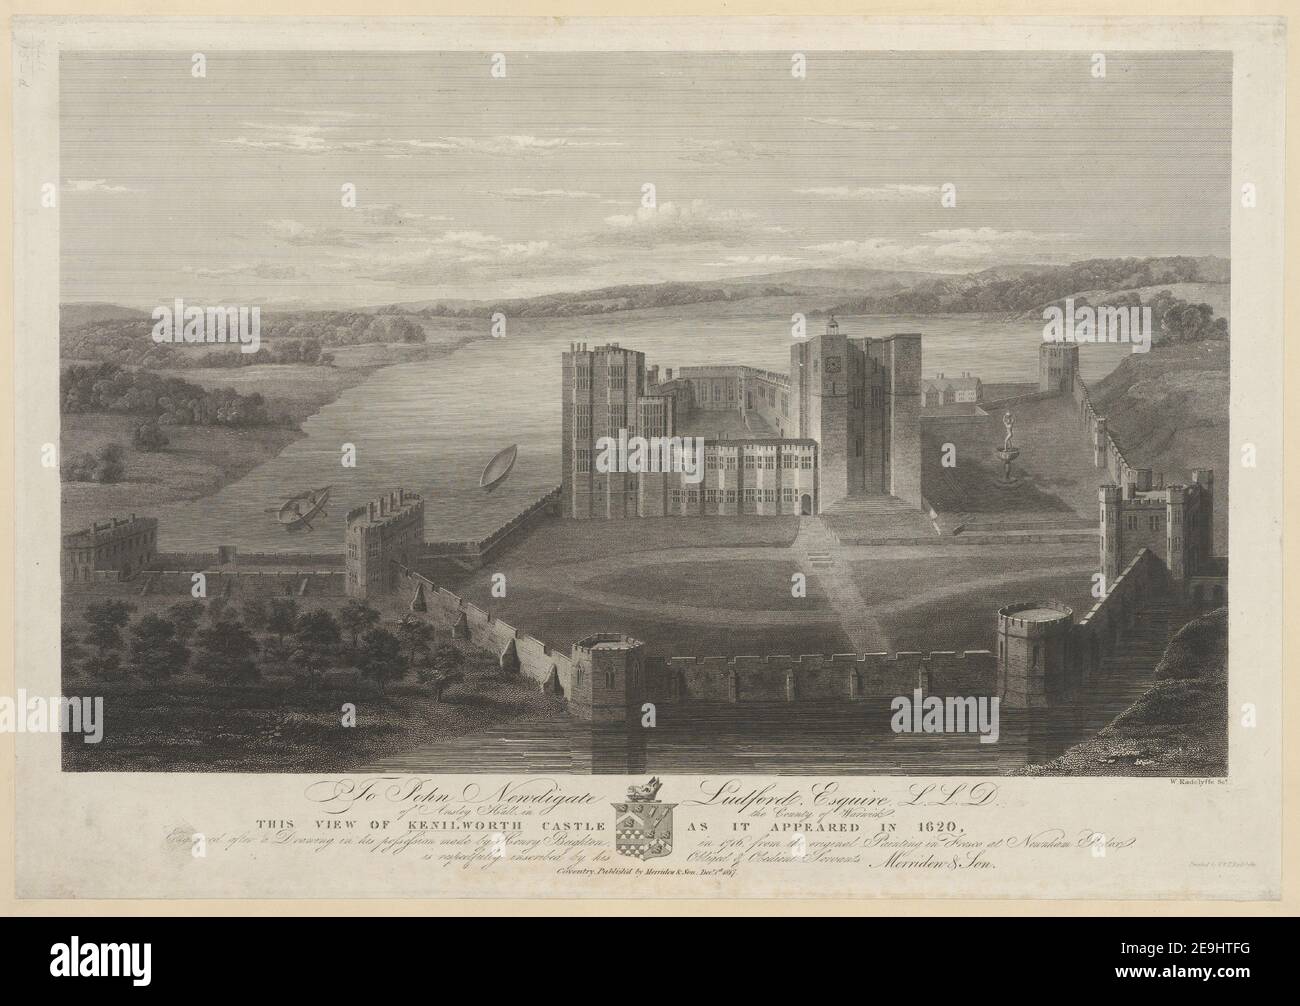 To John Newdigate Ludford, Esquire, L.L.D. of Ansley Hall, in the County of Warwick. THIS VIEW OF KENILWORTH CASTLE AS IT APPEARED IN 1620,  Author  Radclyffe, William 42.95.d. Place of publication: Coventry Publisher: Publish'd by Merridew , Son, Dec.r 1.st., Date of publication: 1817.  Item type: 1 print Medium: etching and engraving Dimensions: sheet 41.5 x 59.7 cm  Former owner: George III, King of Great Britain, 1738-1820 Stock Photo